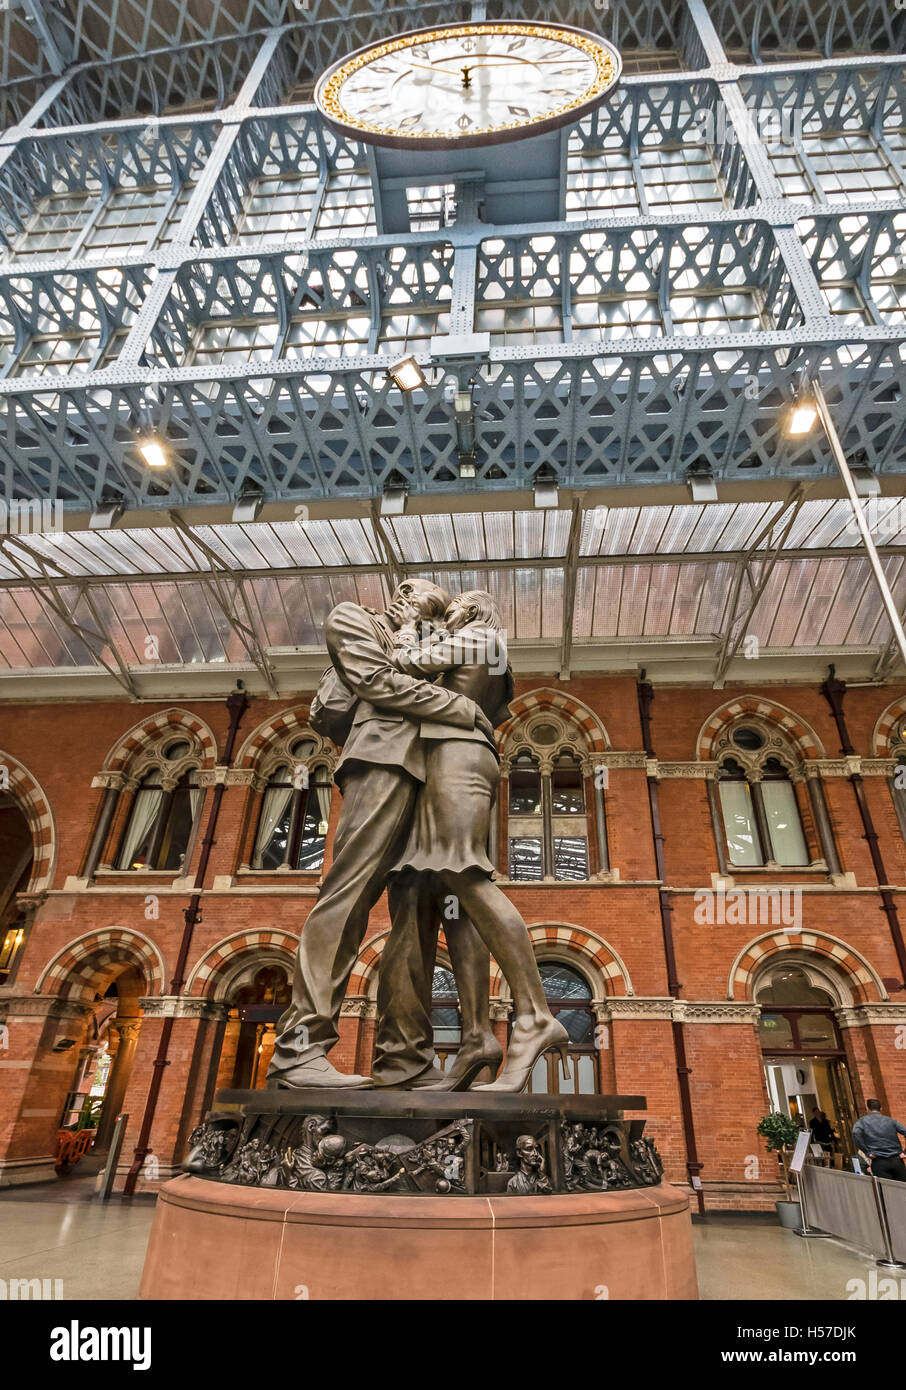 Sculpture of 'The Meeting Place' by 'Paul Day' at the Victorian St. Pancras Railway Station London UK built 1868 and Renovated Stock Photo